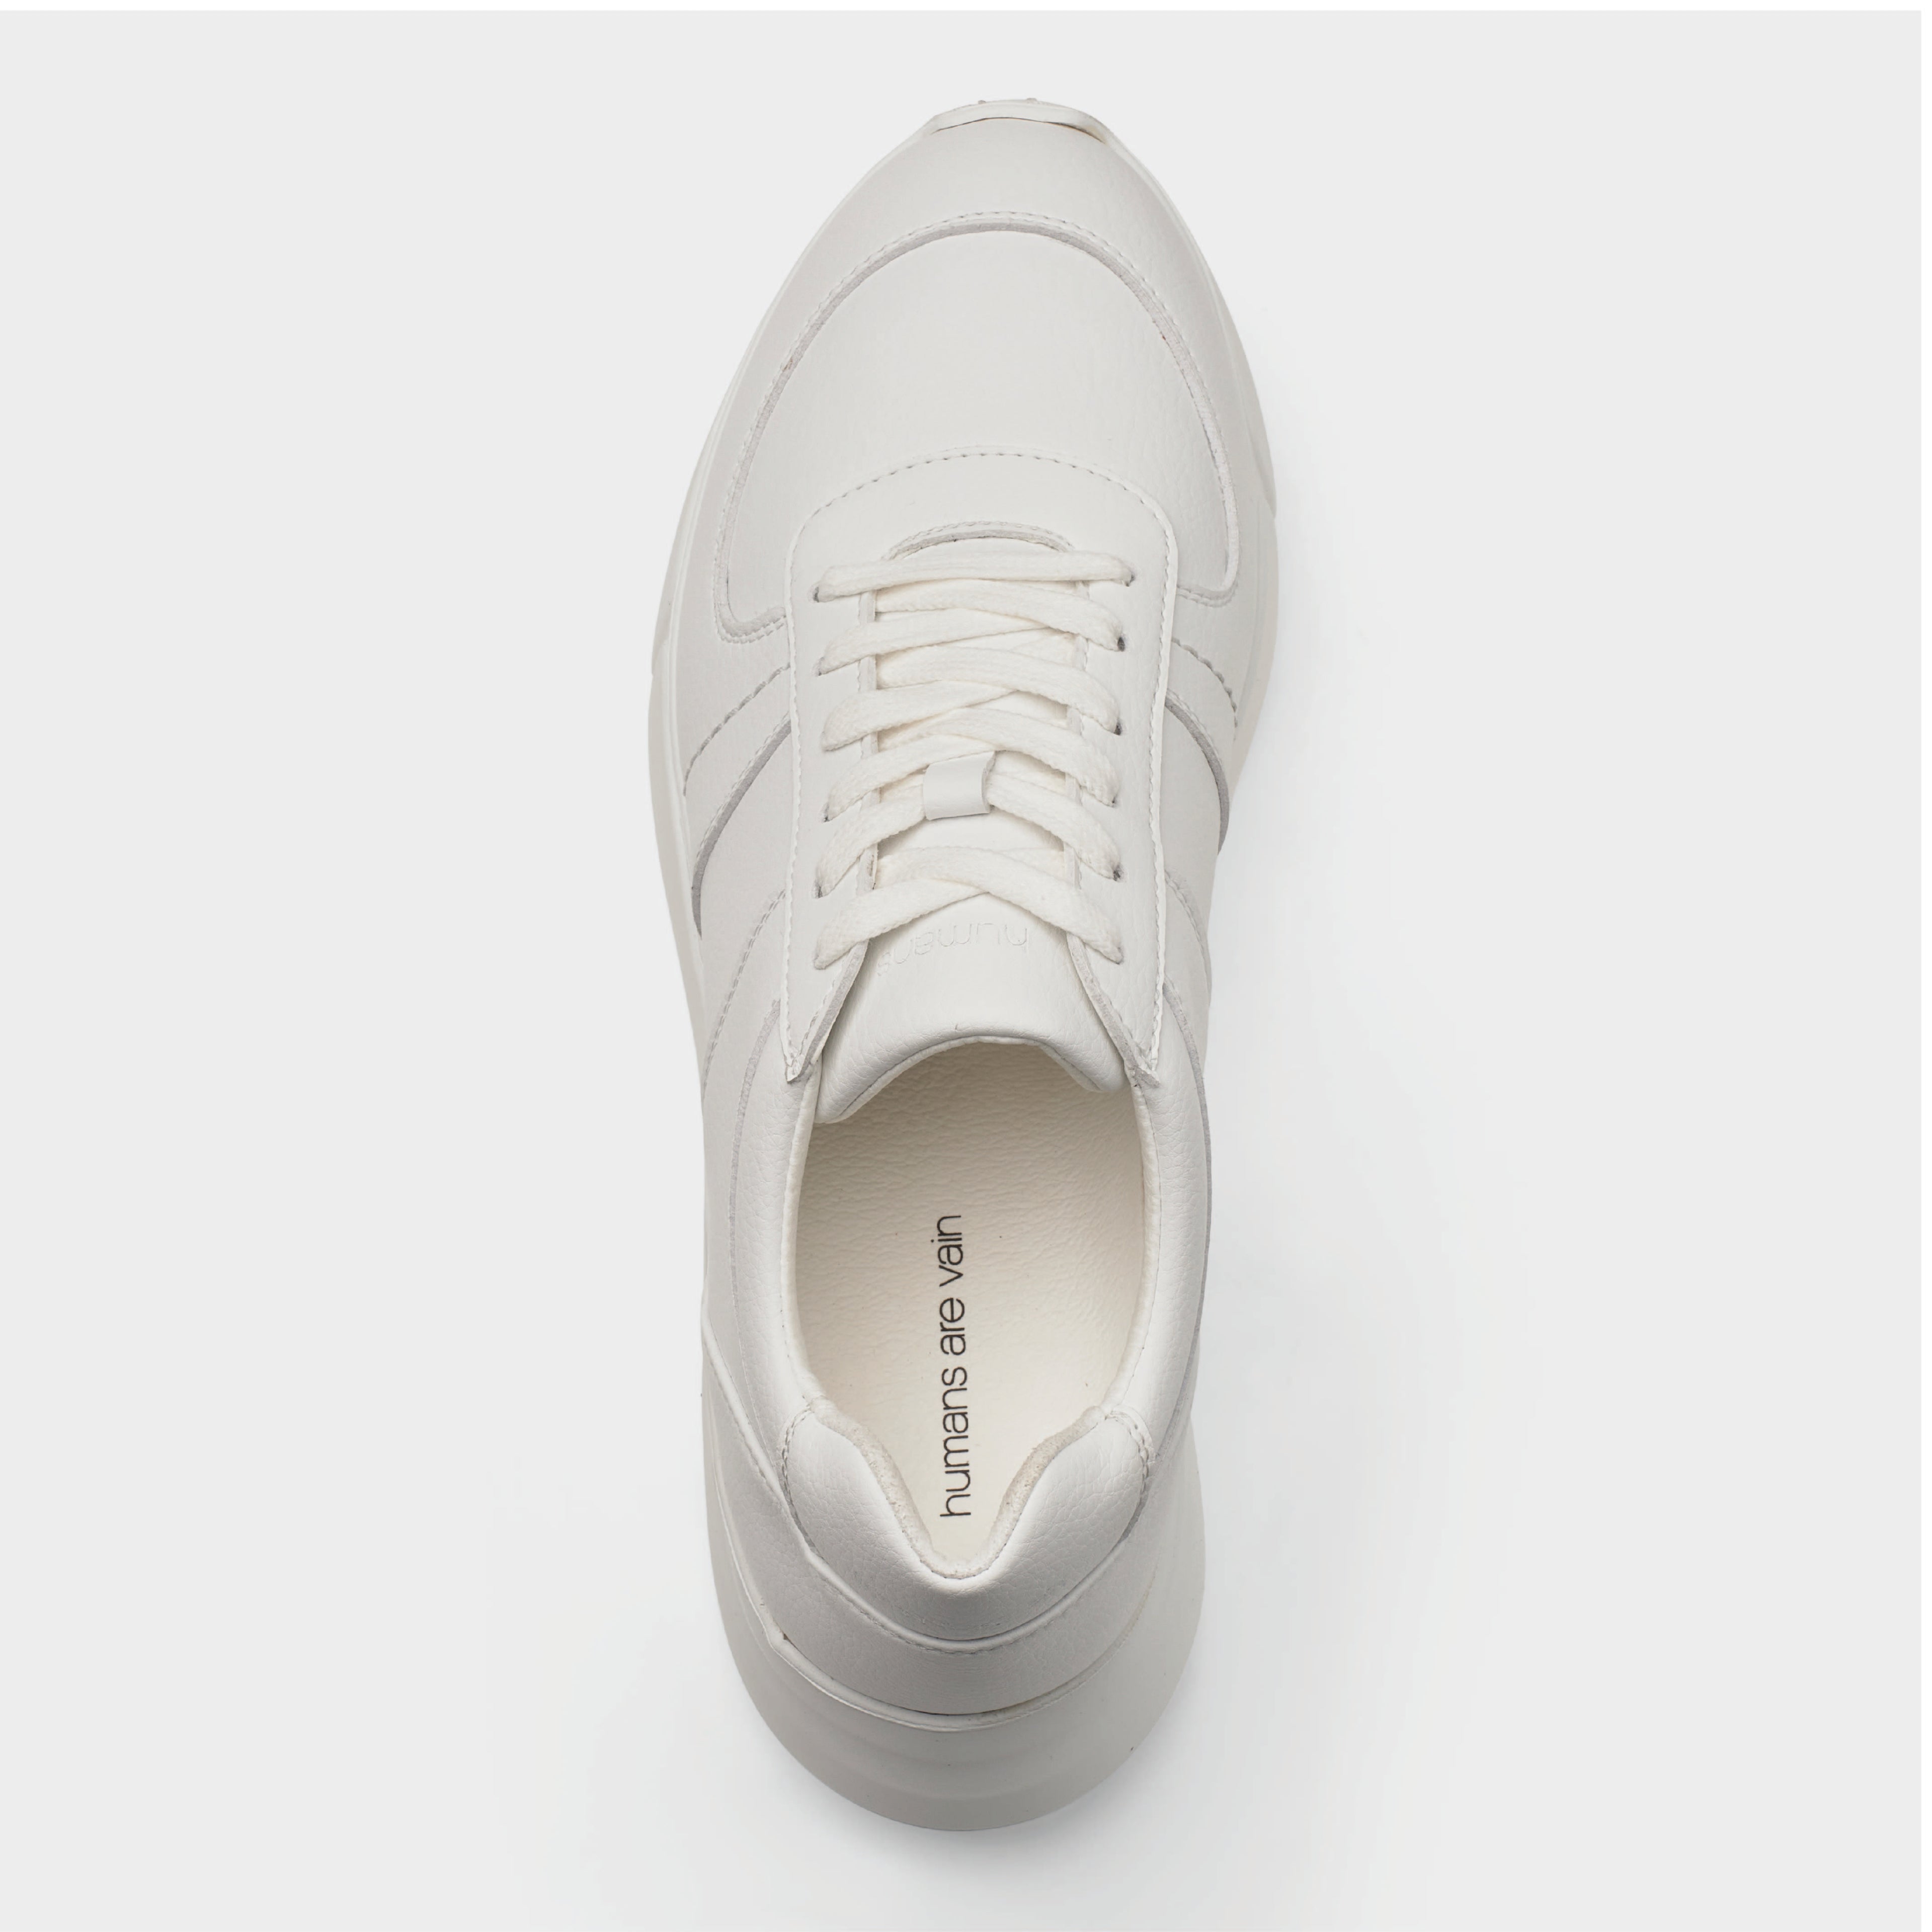 Challenge V3 Sustainable Sneaker White Top